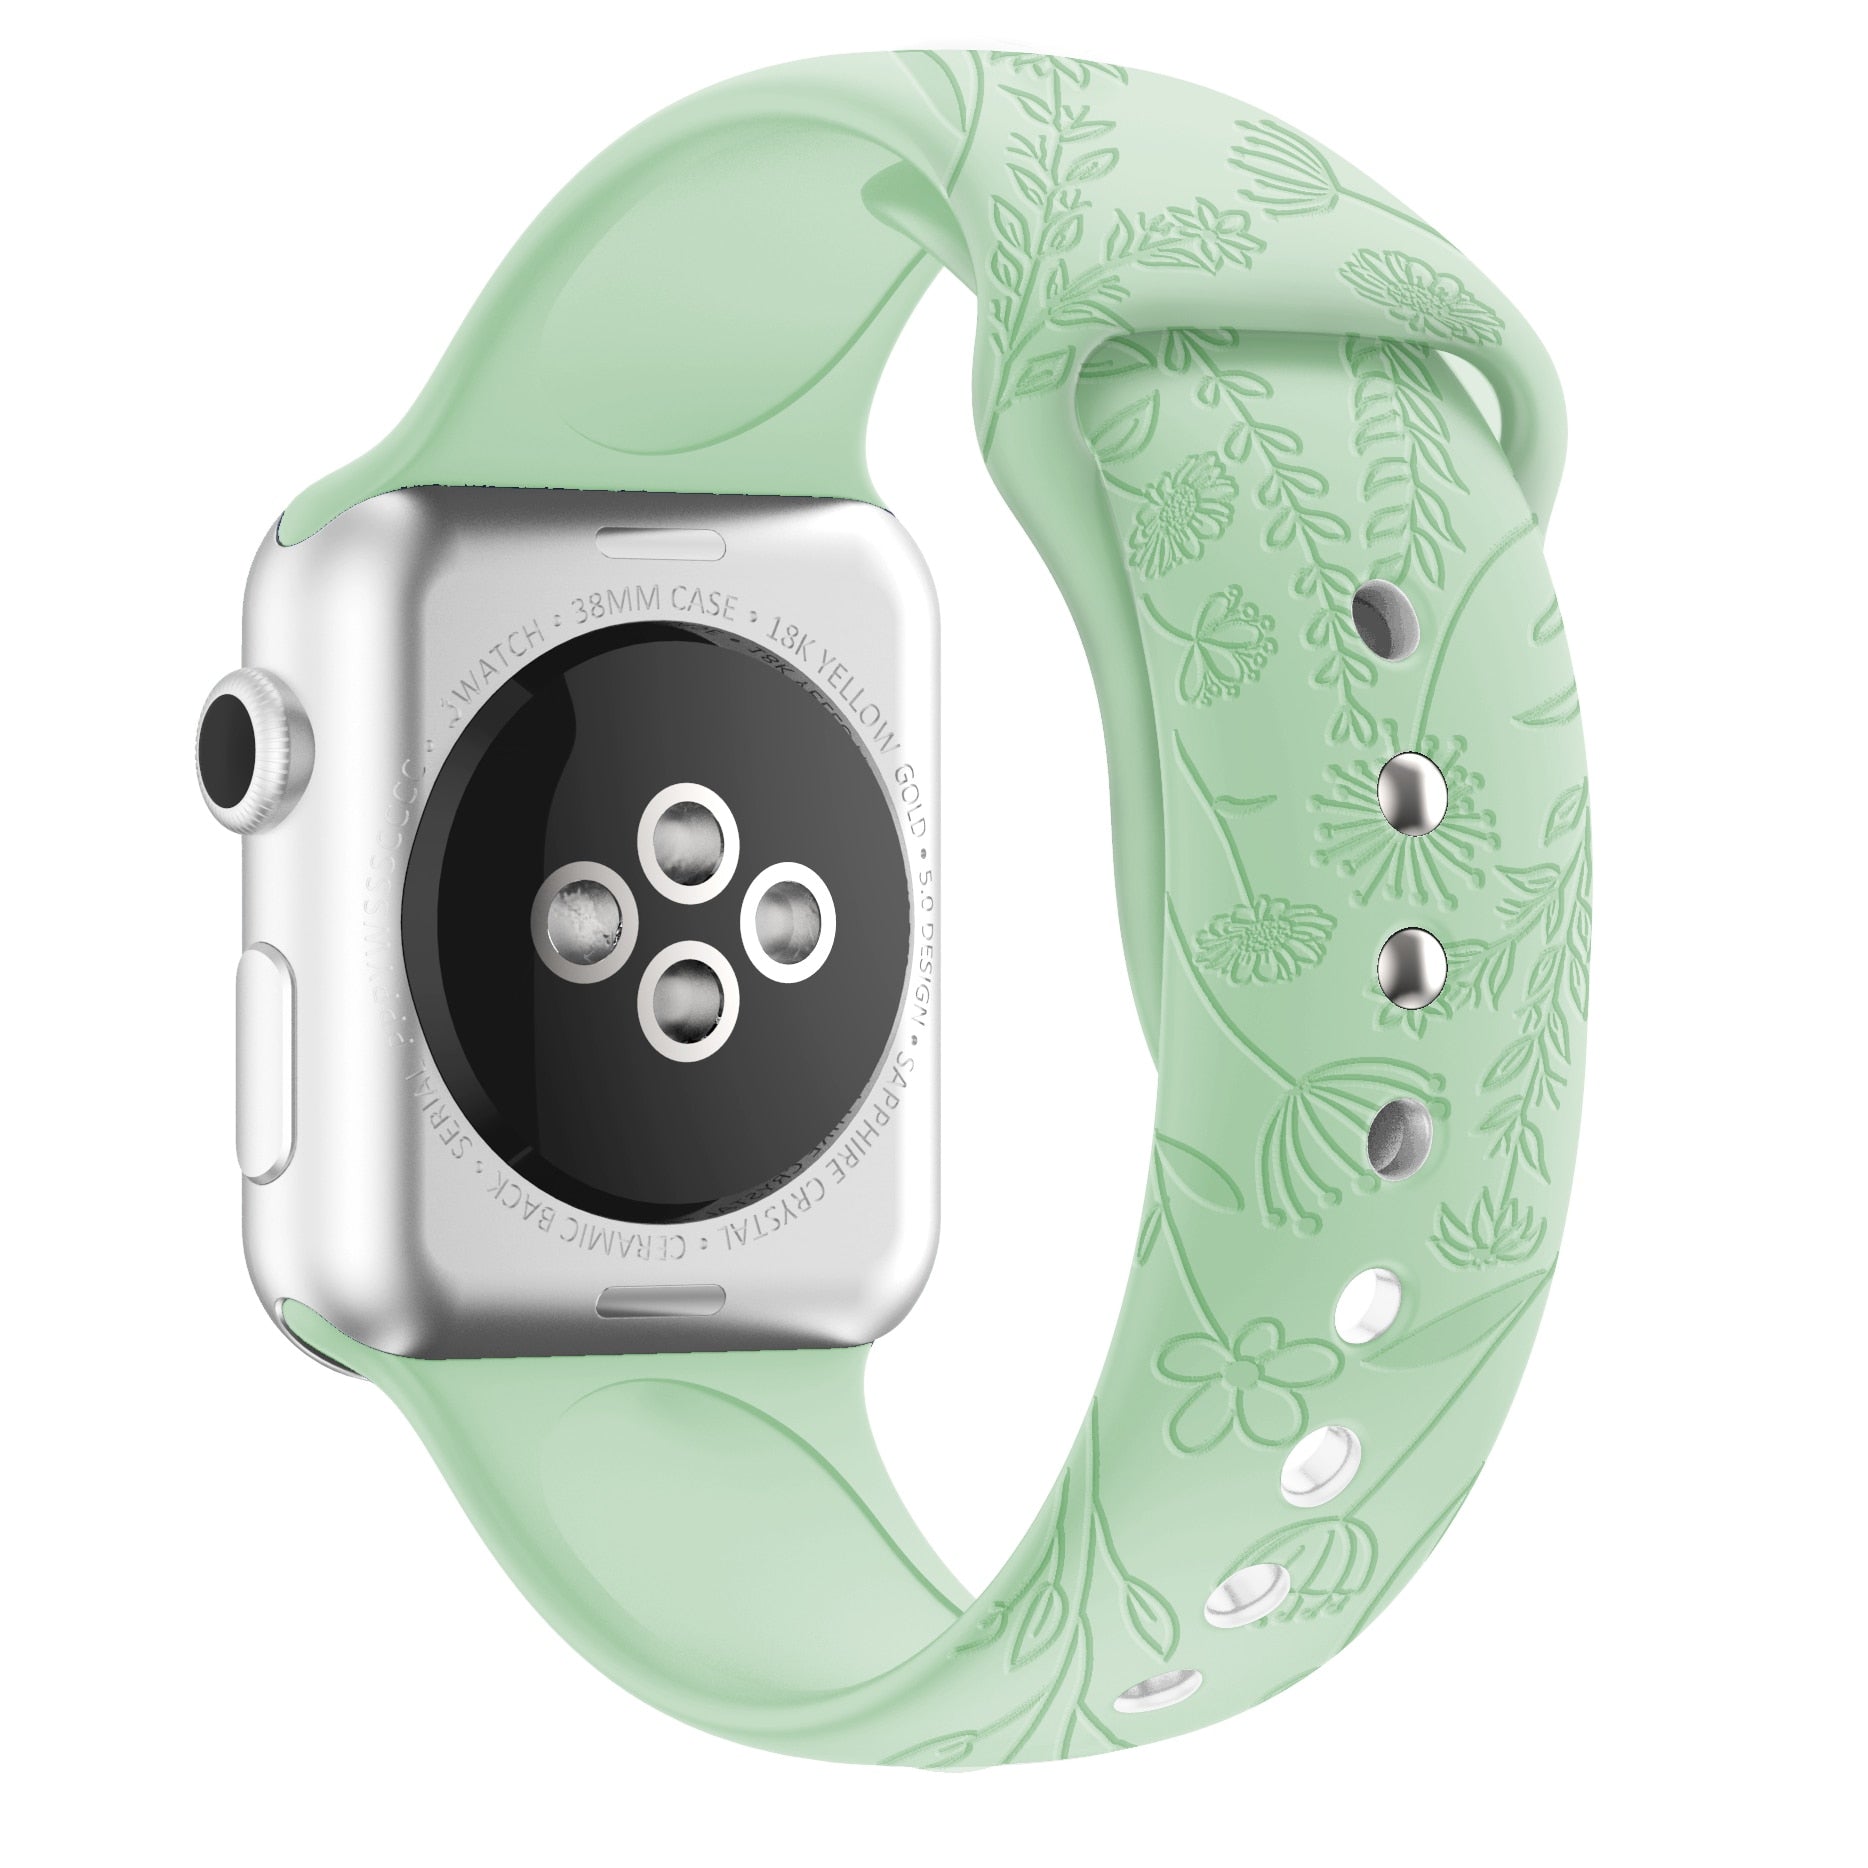 Engraved Silicone Loop for Apple Watch - Vox Megastore